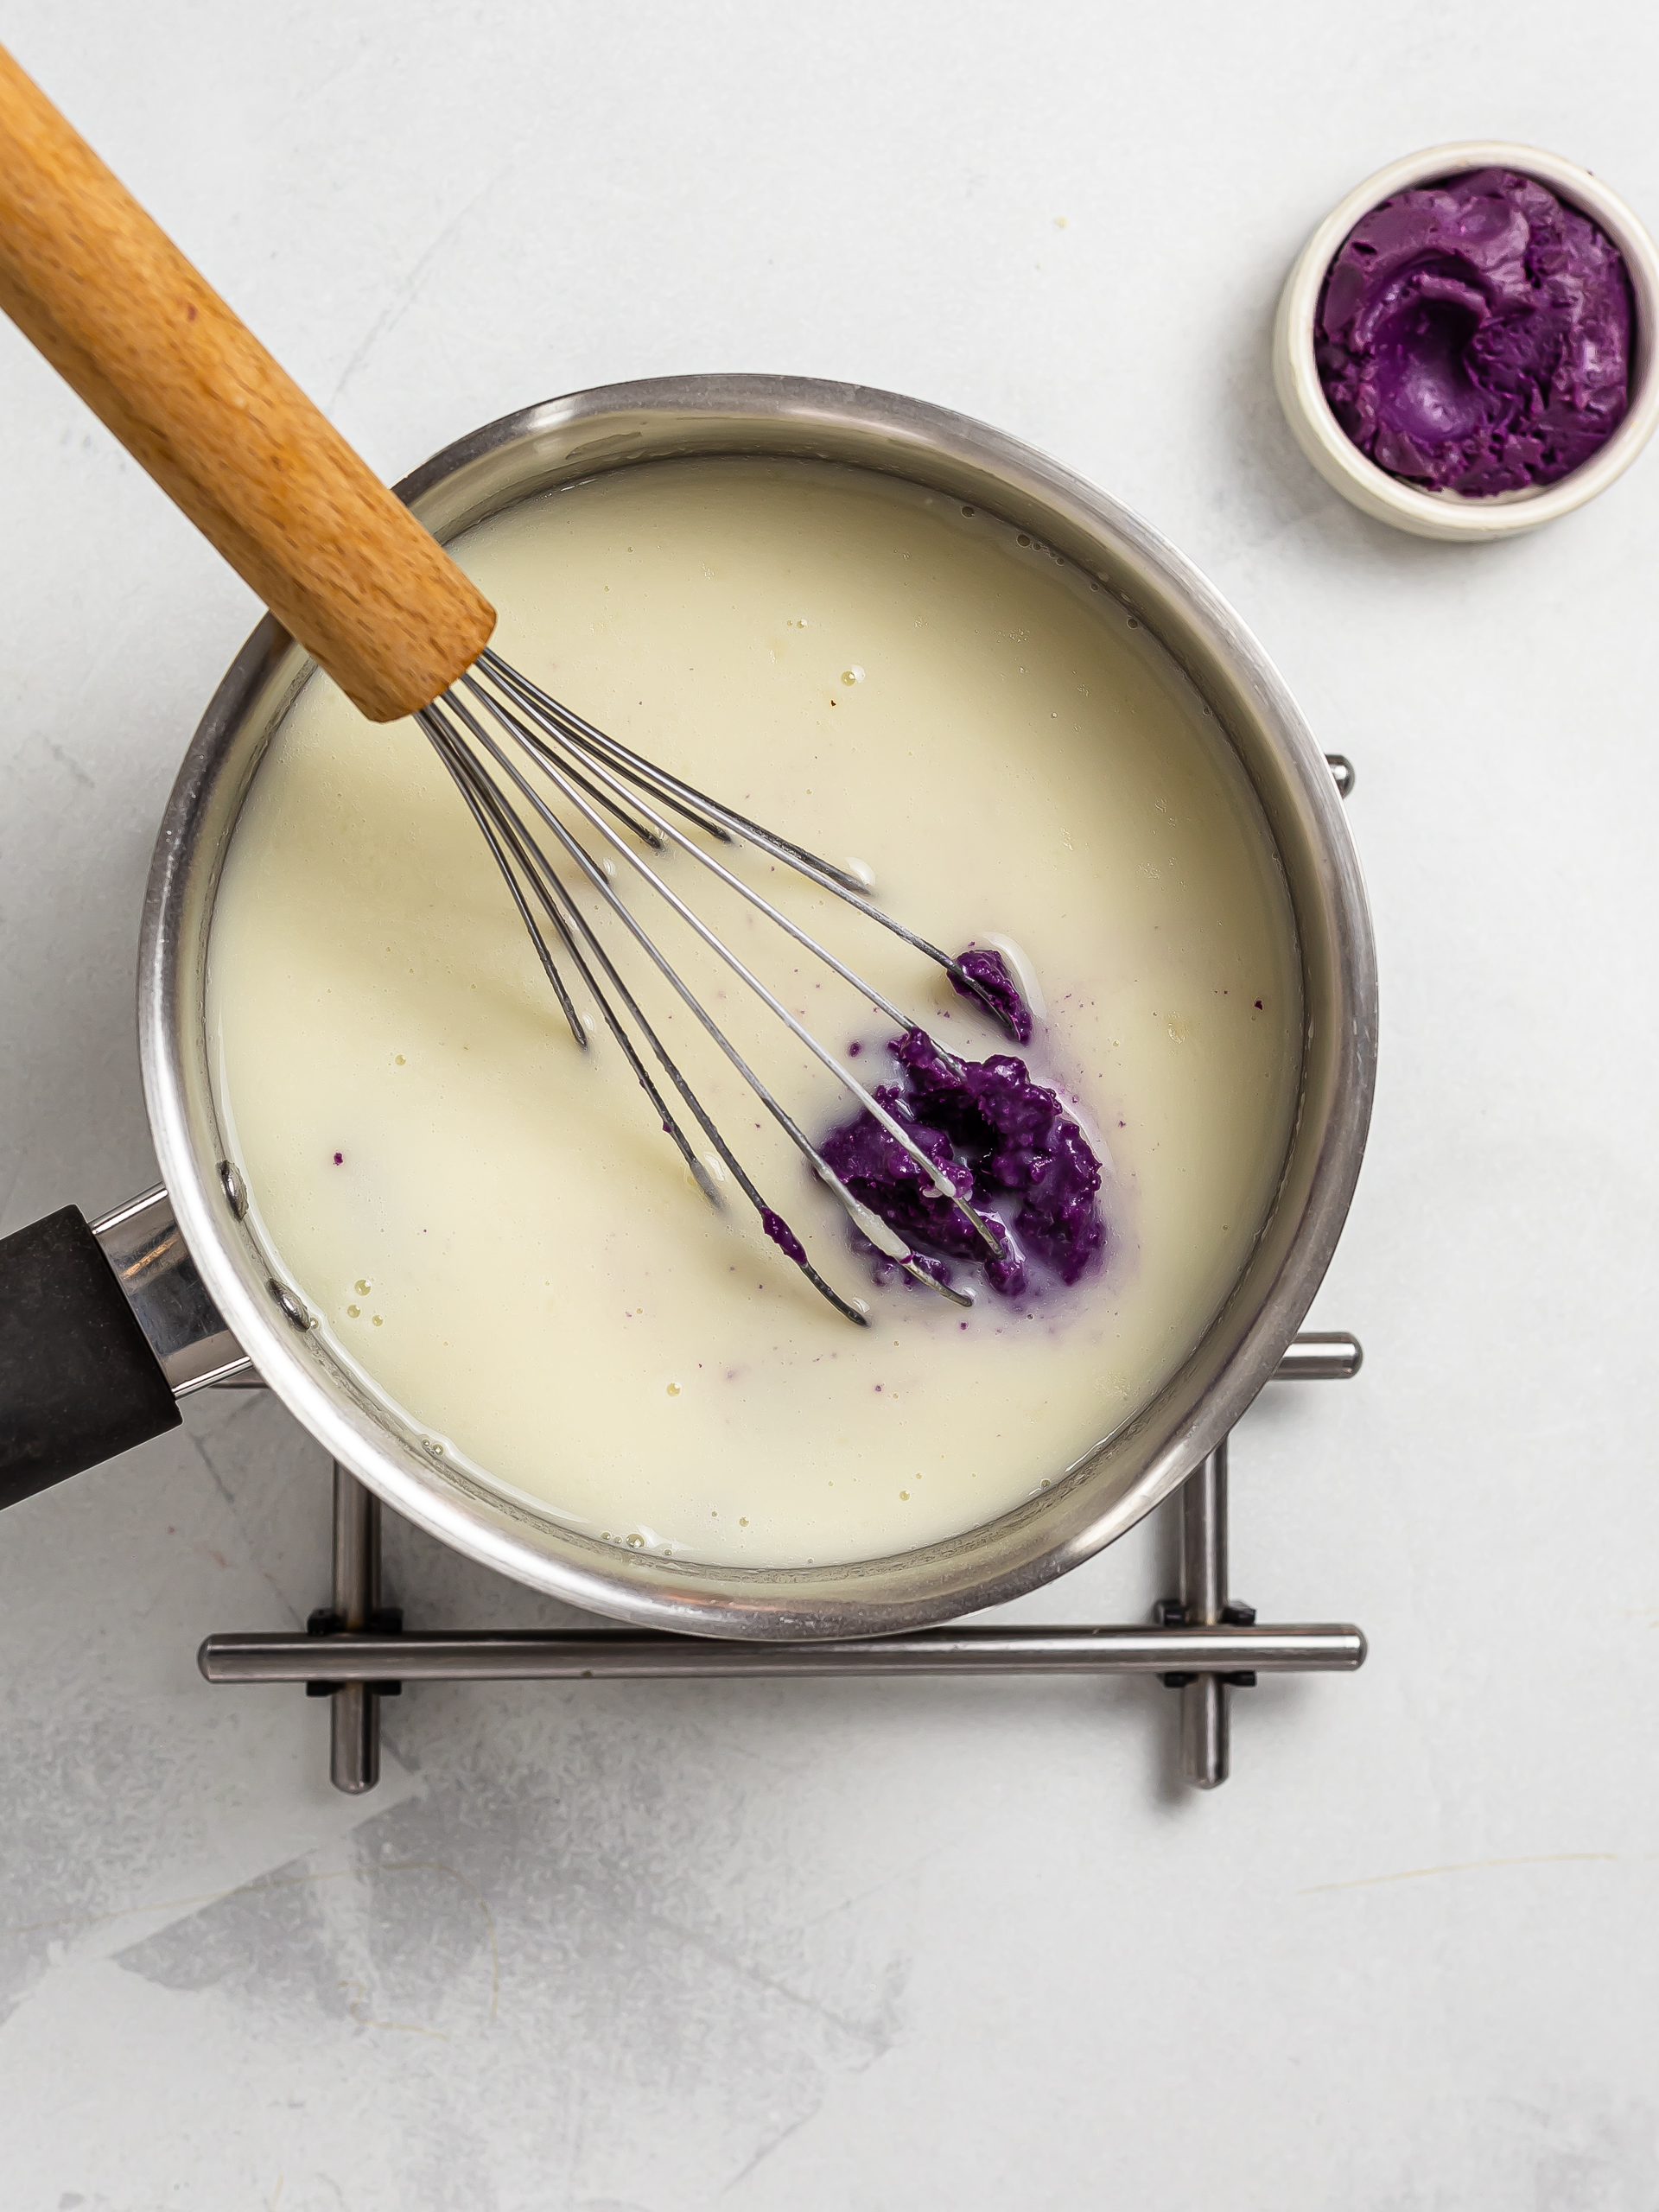 ube flan ingredients in a pot